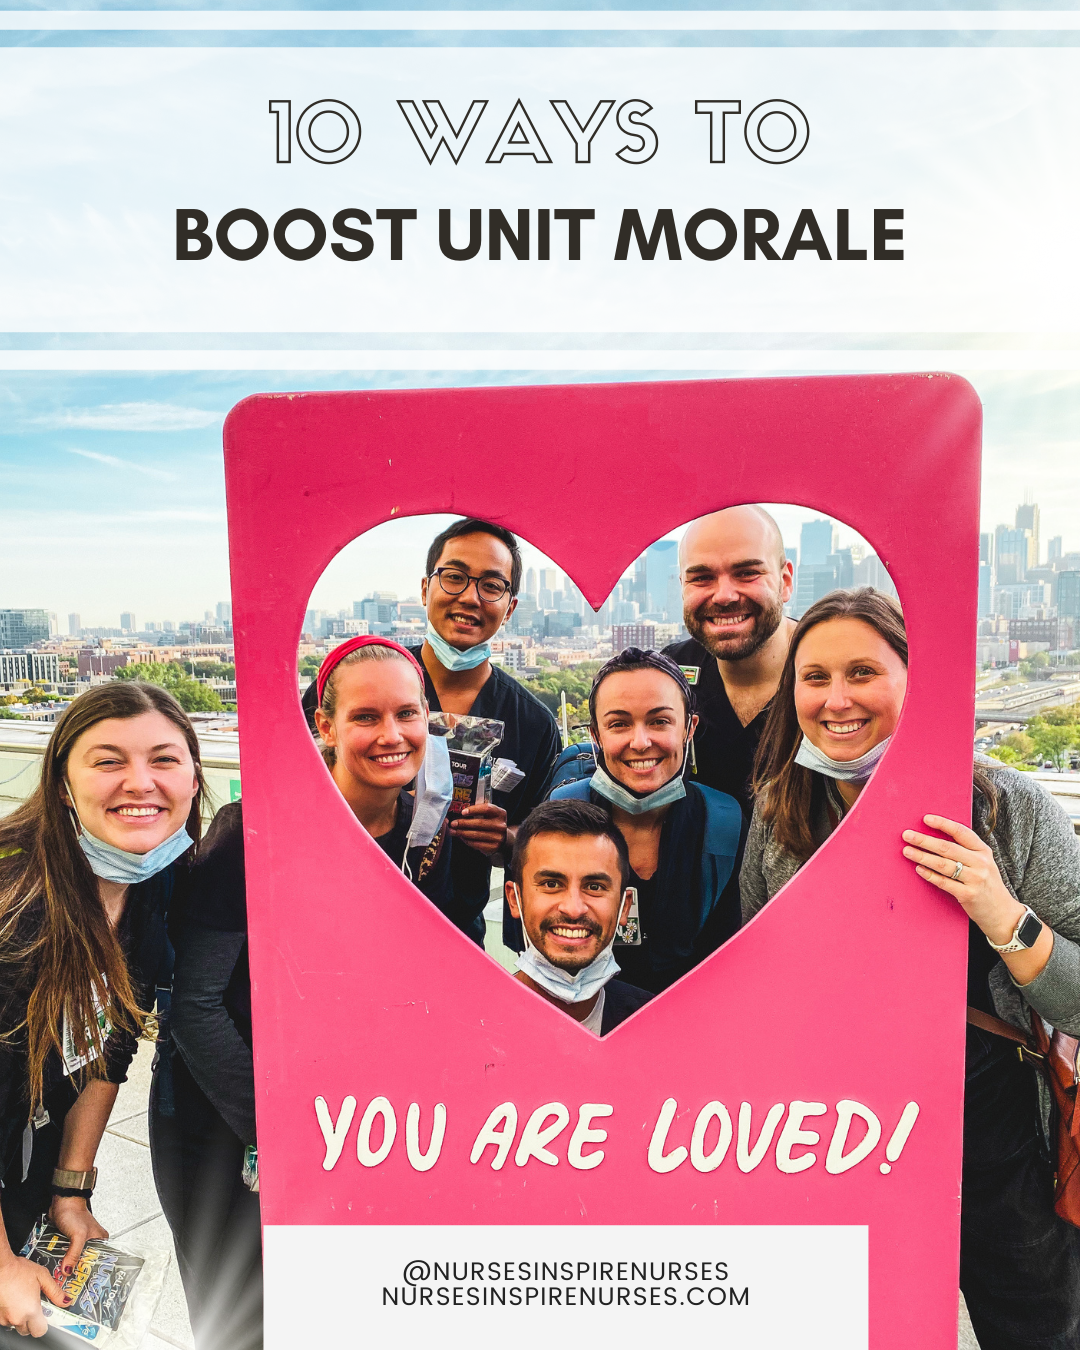 10 Ways to Boost Unit Morale